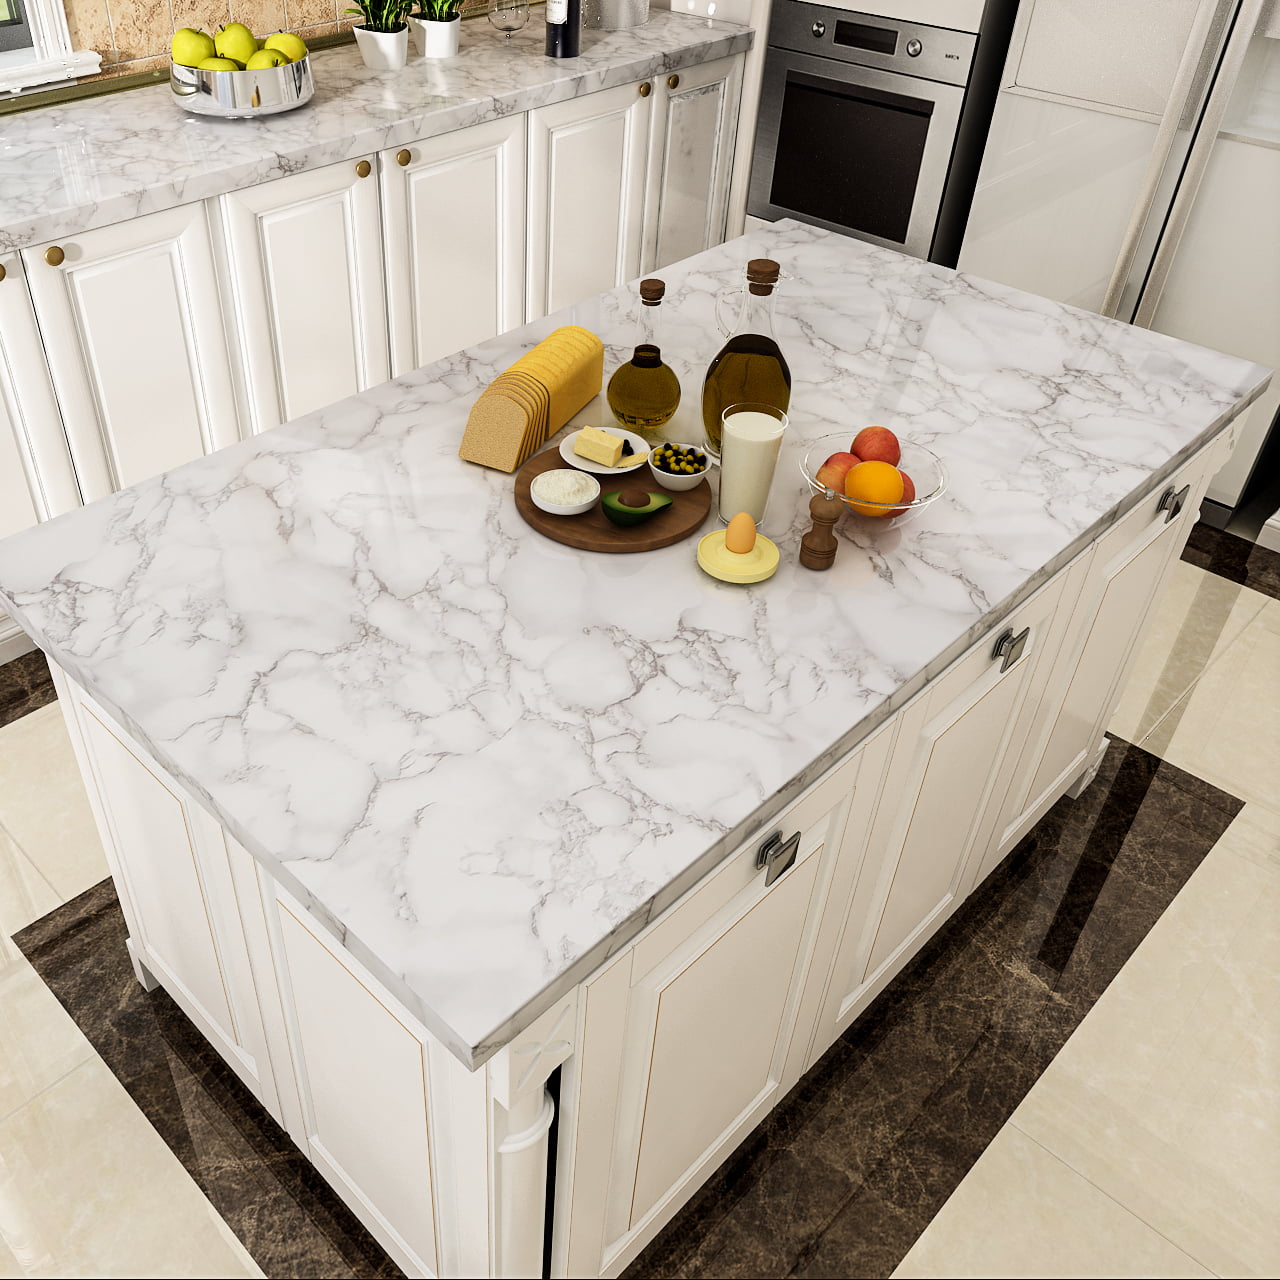 Viseeko Drawer and Shelf Liners for Kitchen Cabinets: Marble